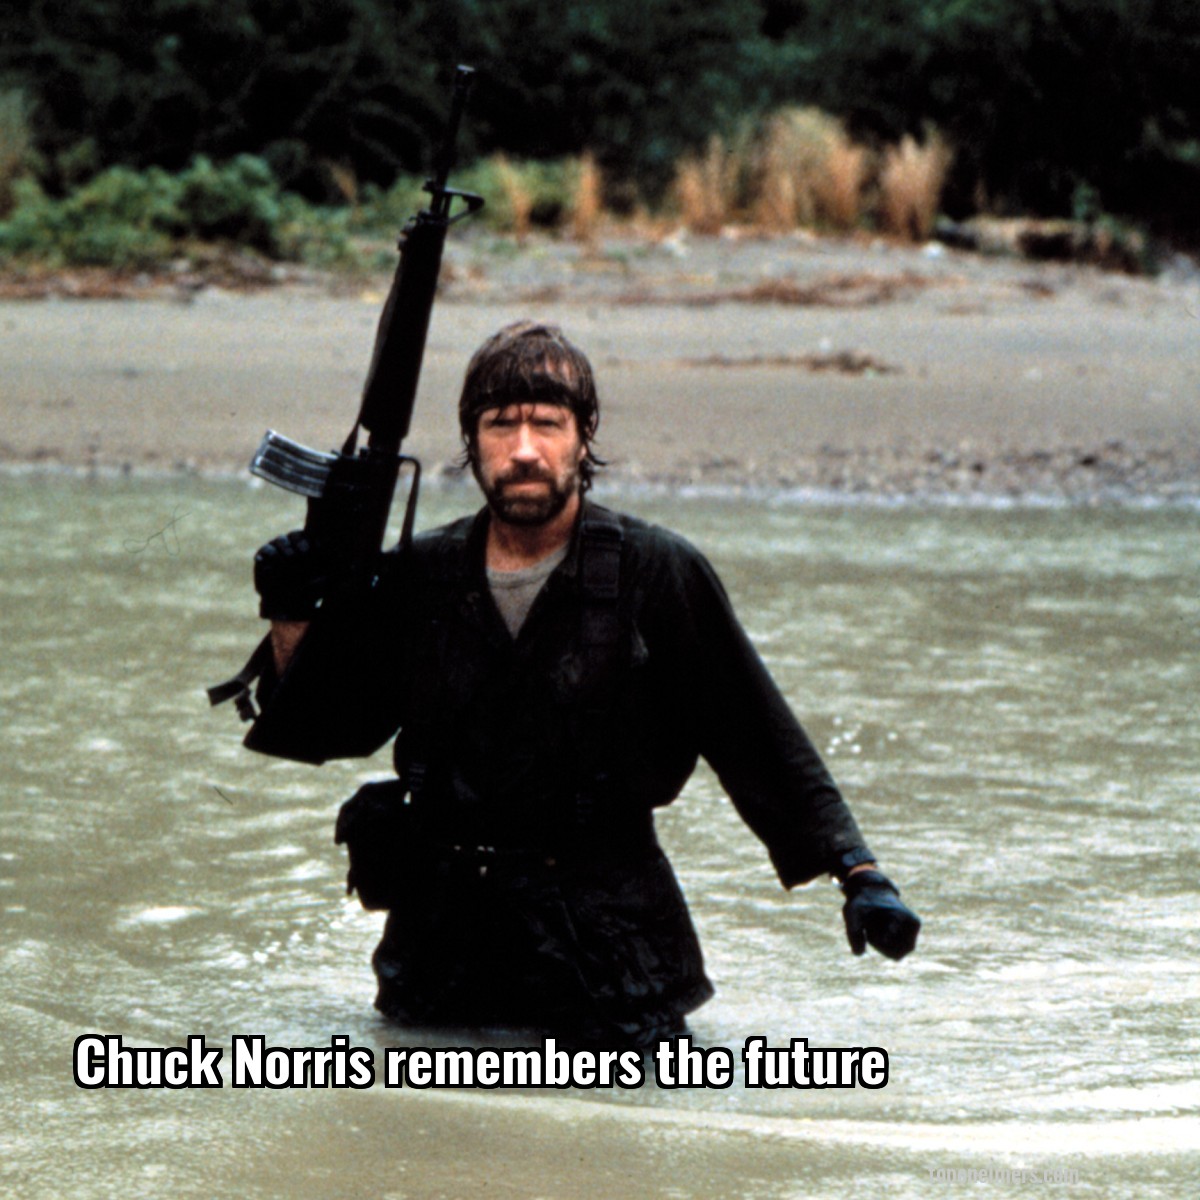 Chuck Norris remembers the future